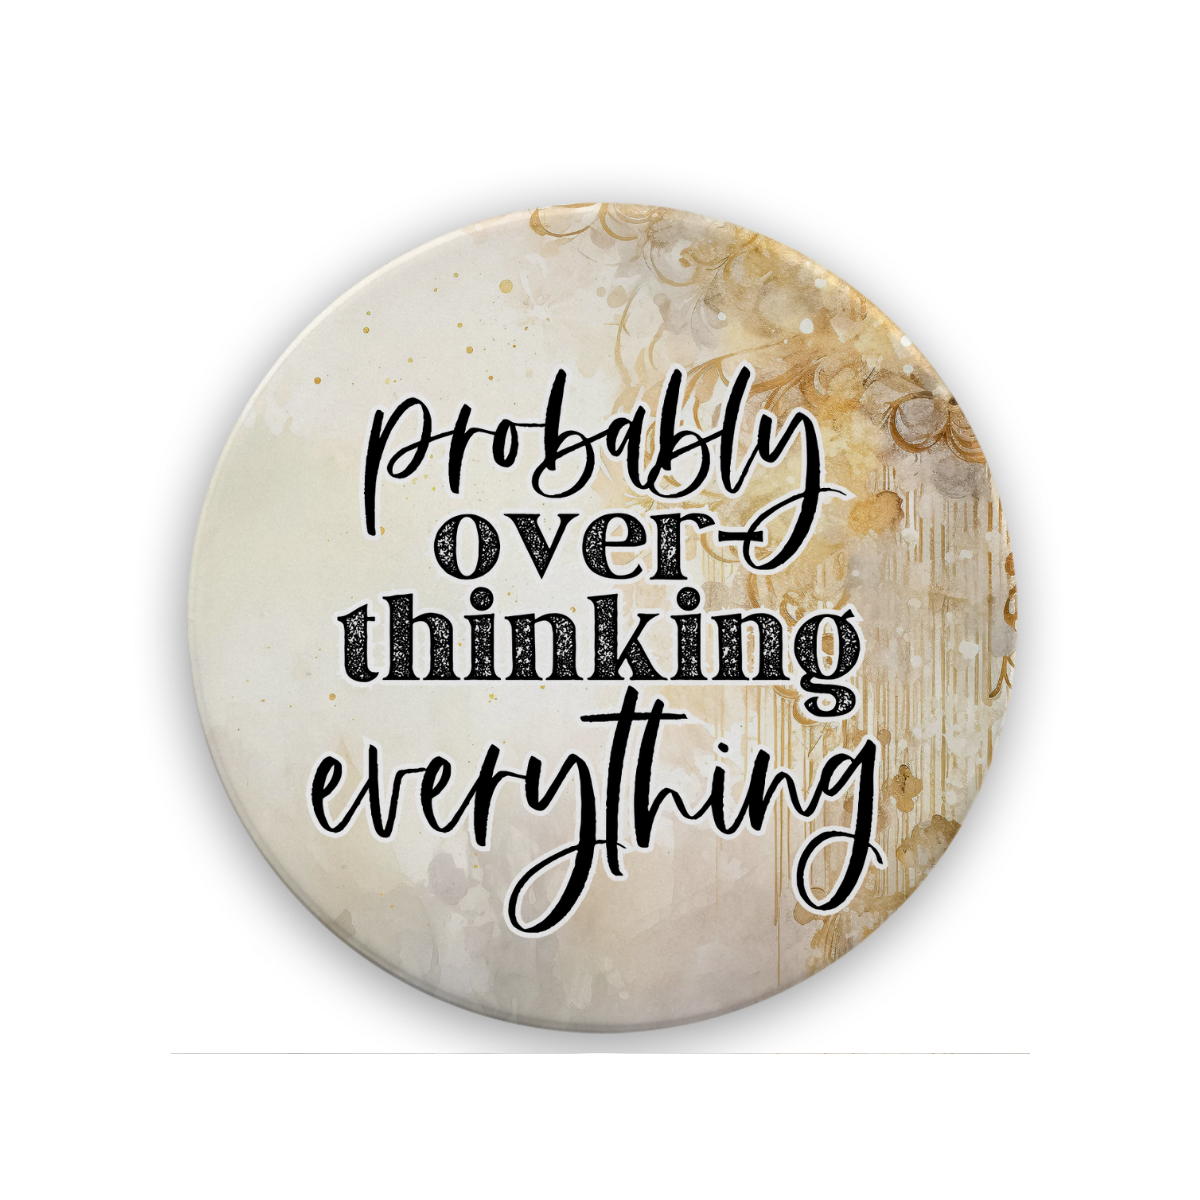 Probably Over-thinking Everything | Drink Coaster - The Pretty Things.ca